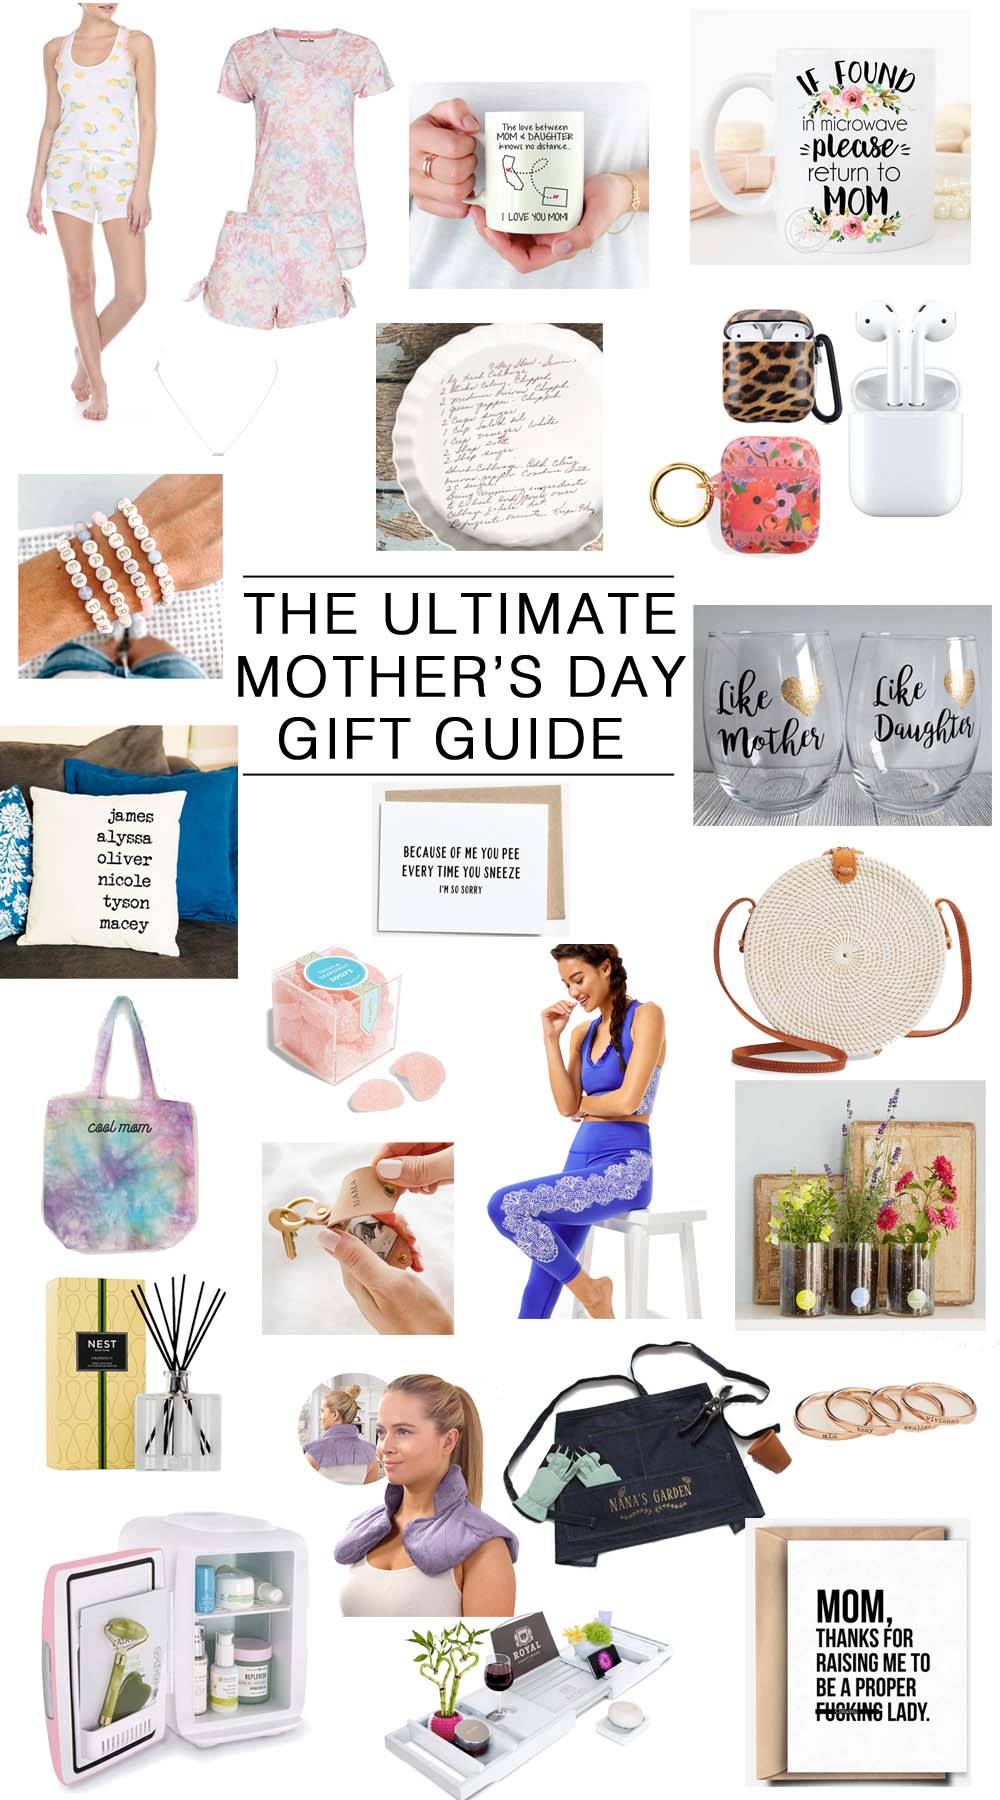 Mother's Day Gift Ideas by popular Florida life and style blog, The Modern Savvy: collage image of airpods, NEST grapefruit diffusers, personalized beaded bracelets, lemon print tank set, tie dye lounge set, Roberta Roller Rabbit, distance mug, if found mug, delicate bar necklace, custom recipe dish,leopard airpod case, floral airpod case, personalized pillow, sugarfina candy, wine glass set, cool mom tote, phot keychain, sports bra, leggins, rattan purse, birth month flower grow kit, neck/back heated wrap, garden apron, personalized rings, beauty and drink fridge, bath tray, and funny mother's day card. 